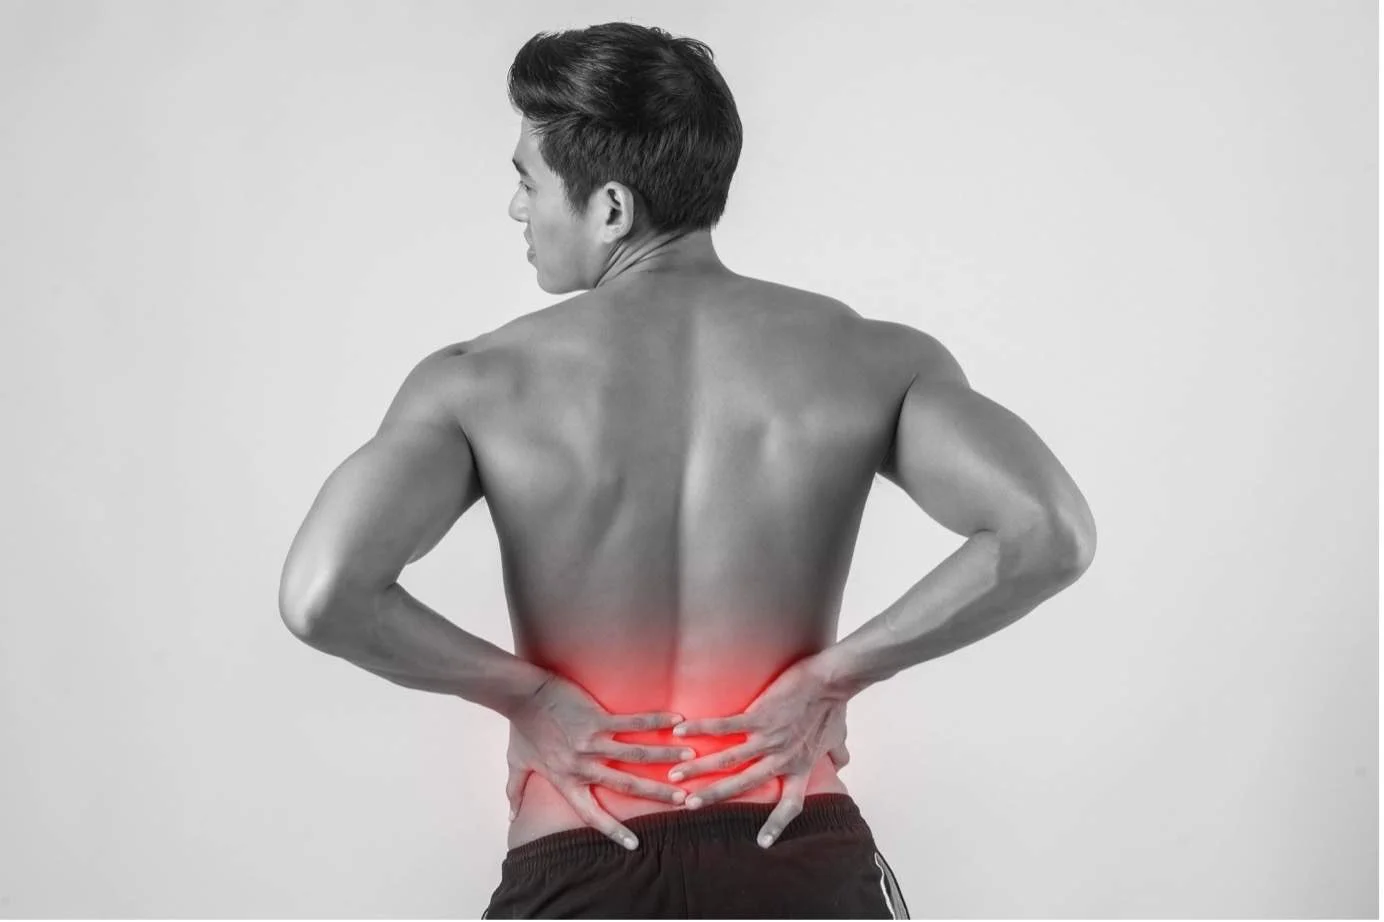 Man holding his lower back due to lower back pain